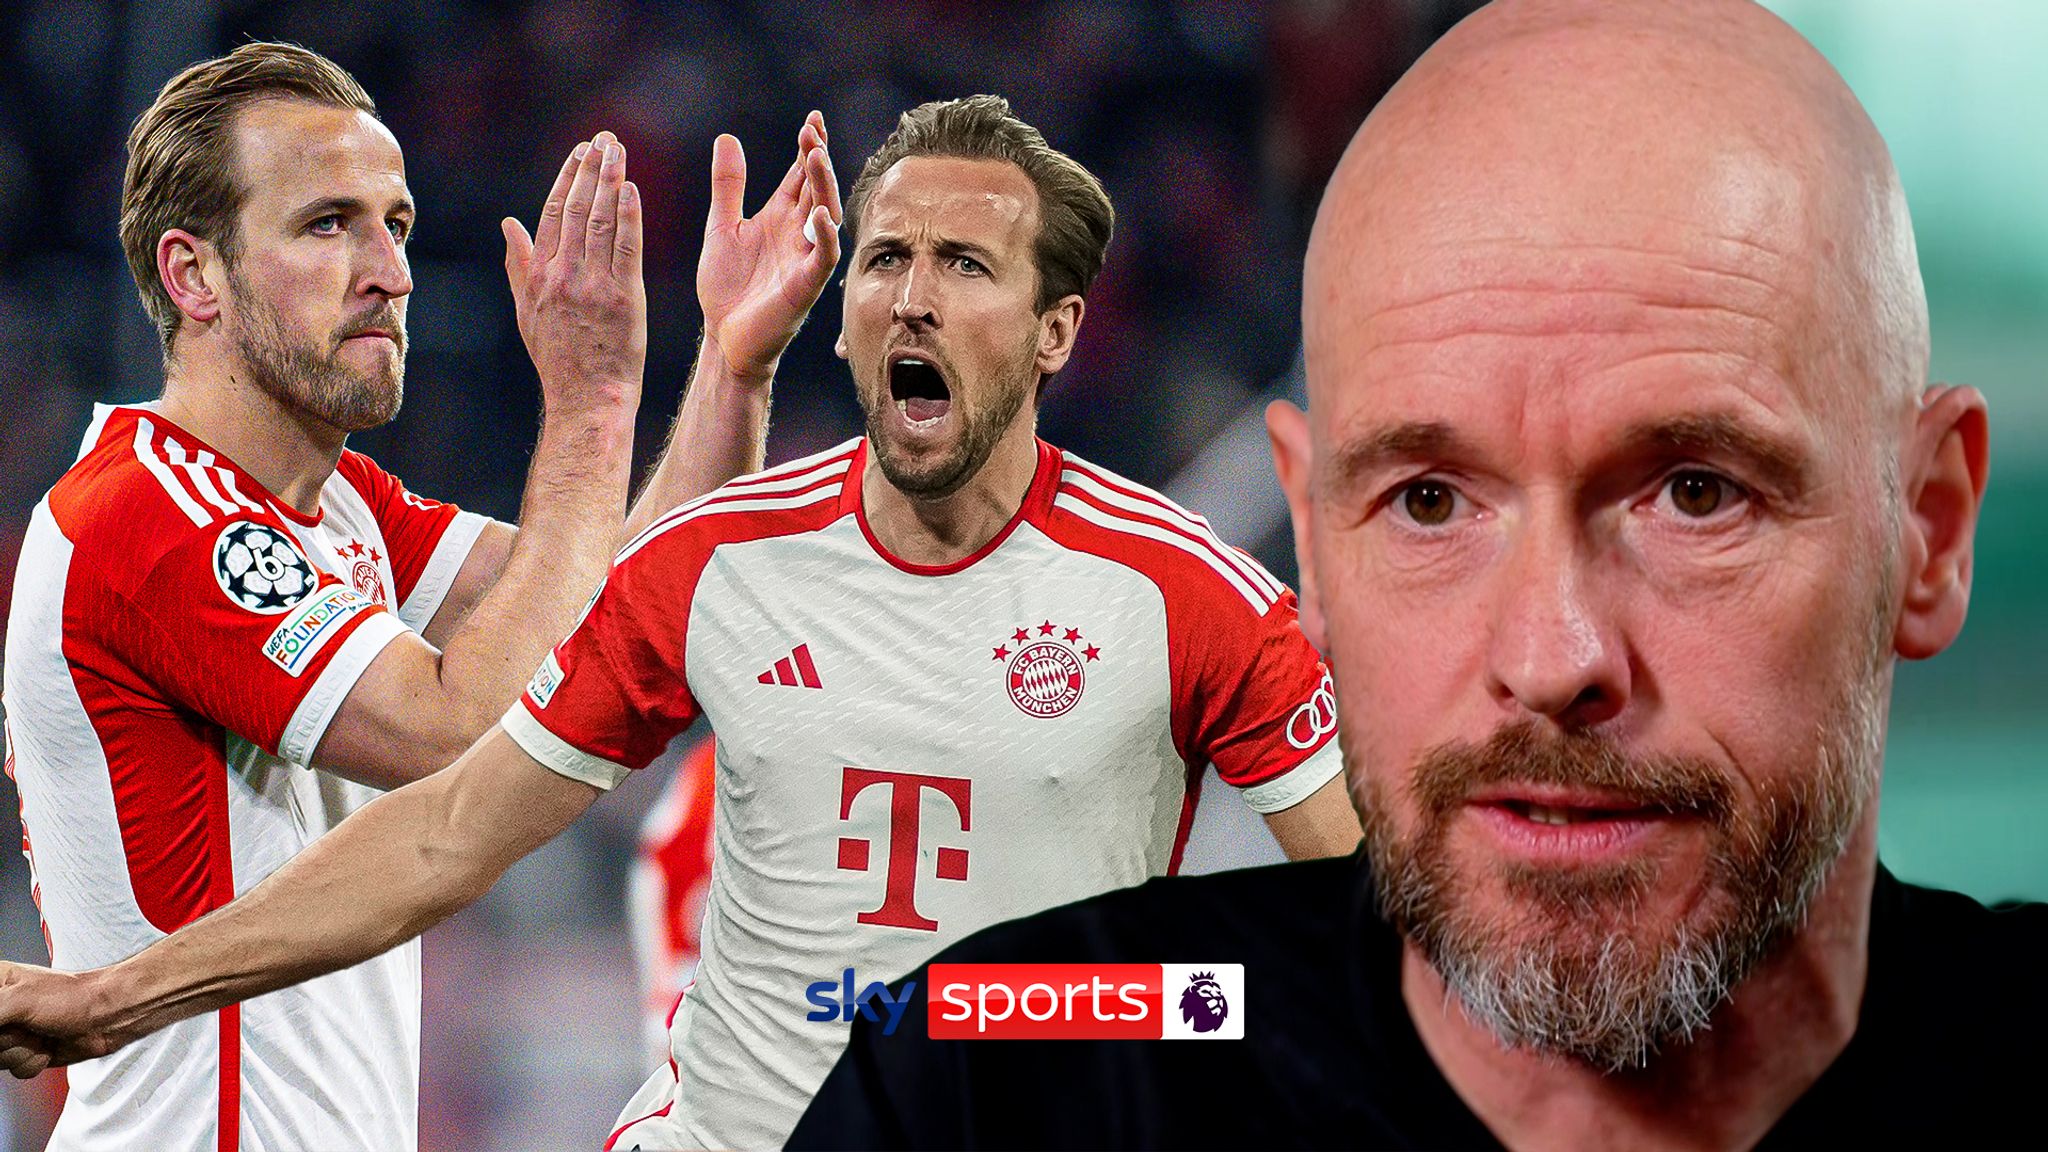 Bayern's Quest for a New Coach: Ten Hag Remains Loyal to Man Utd Amid Speculations